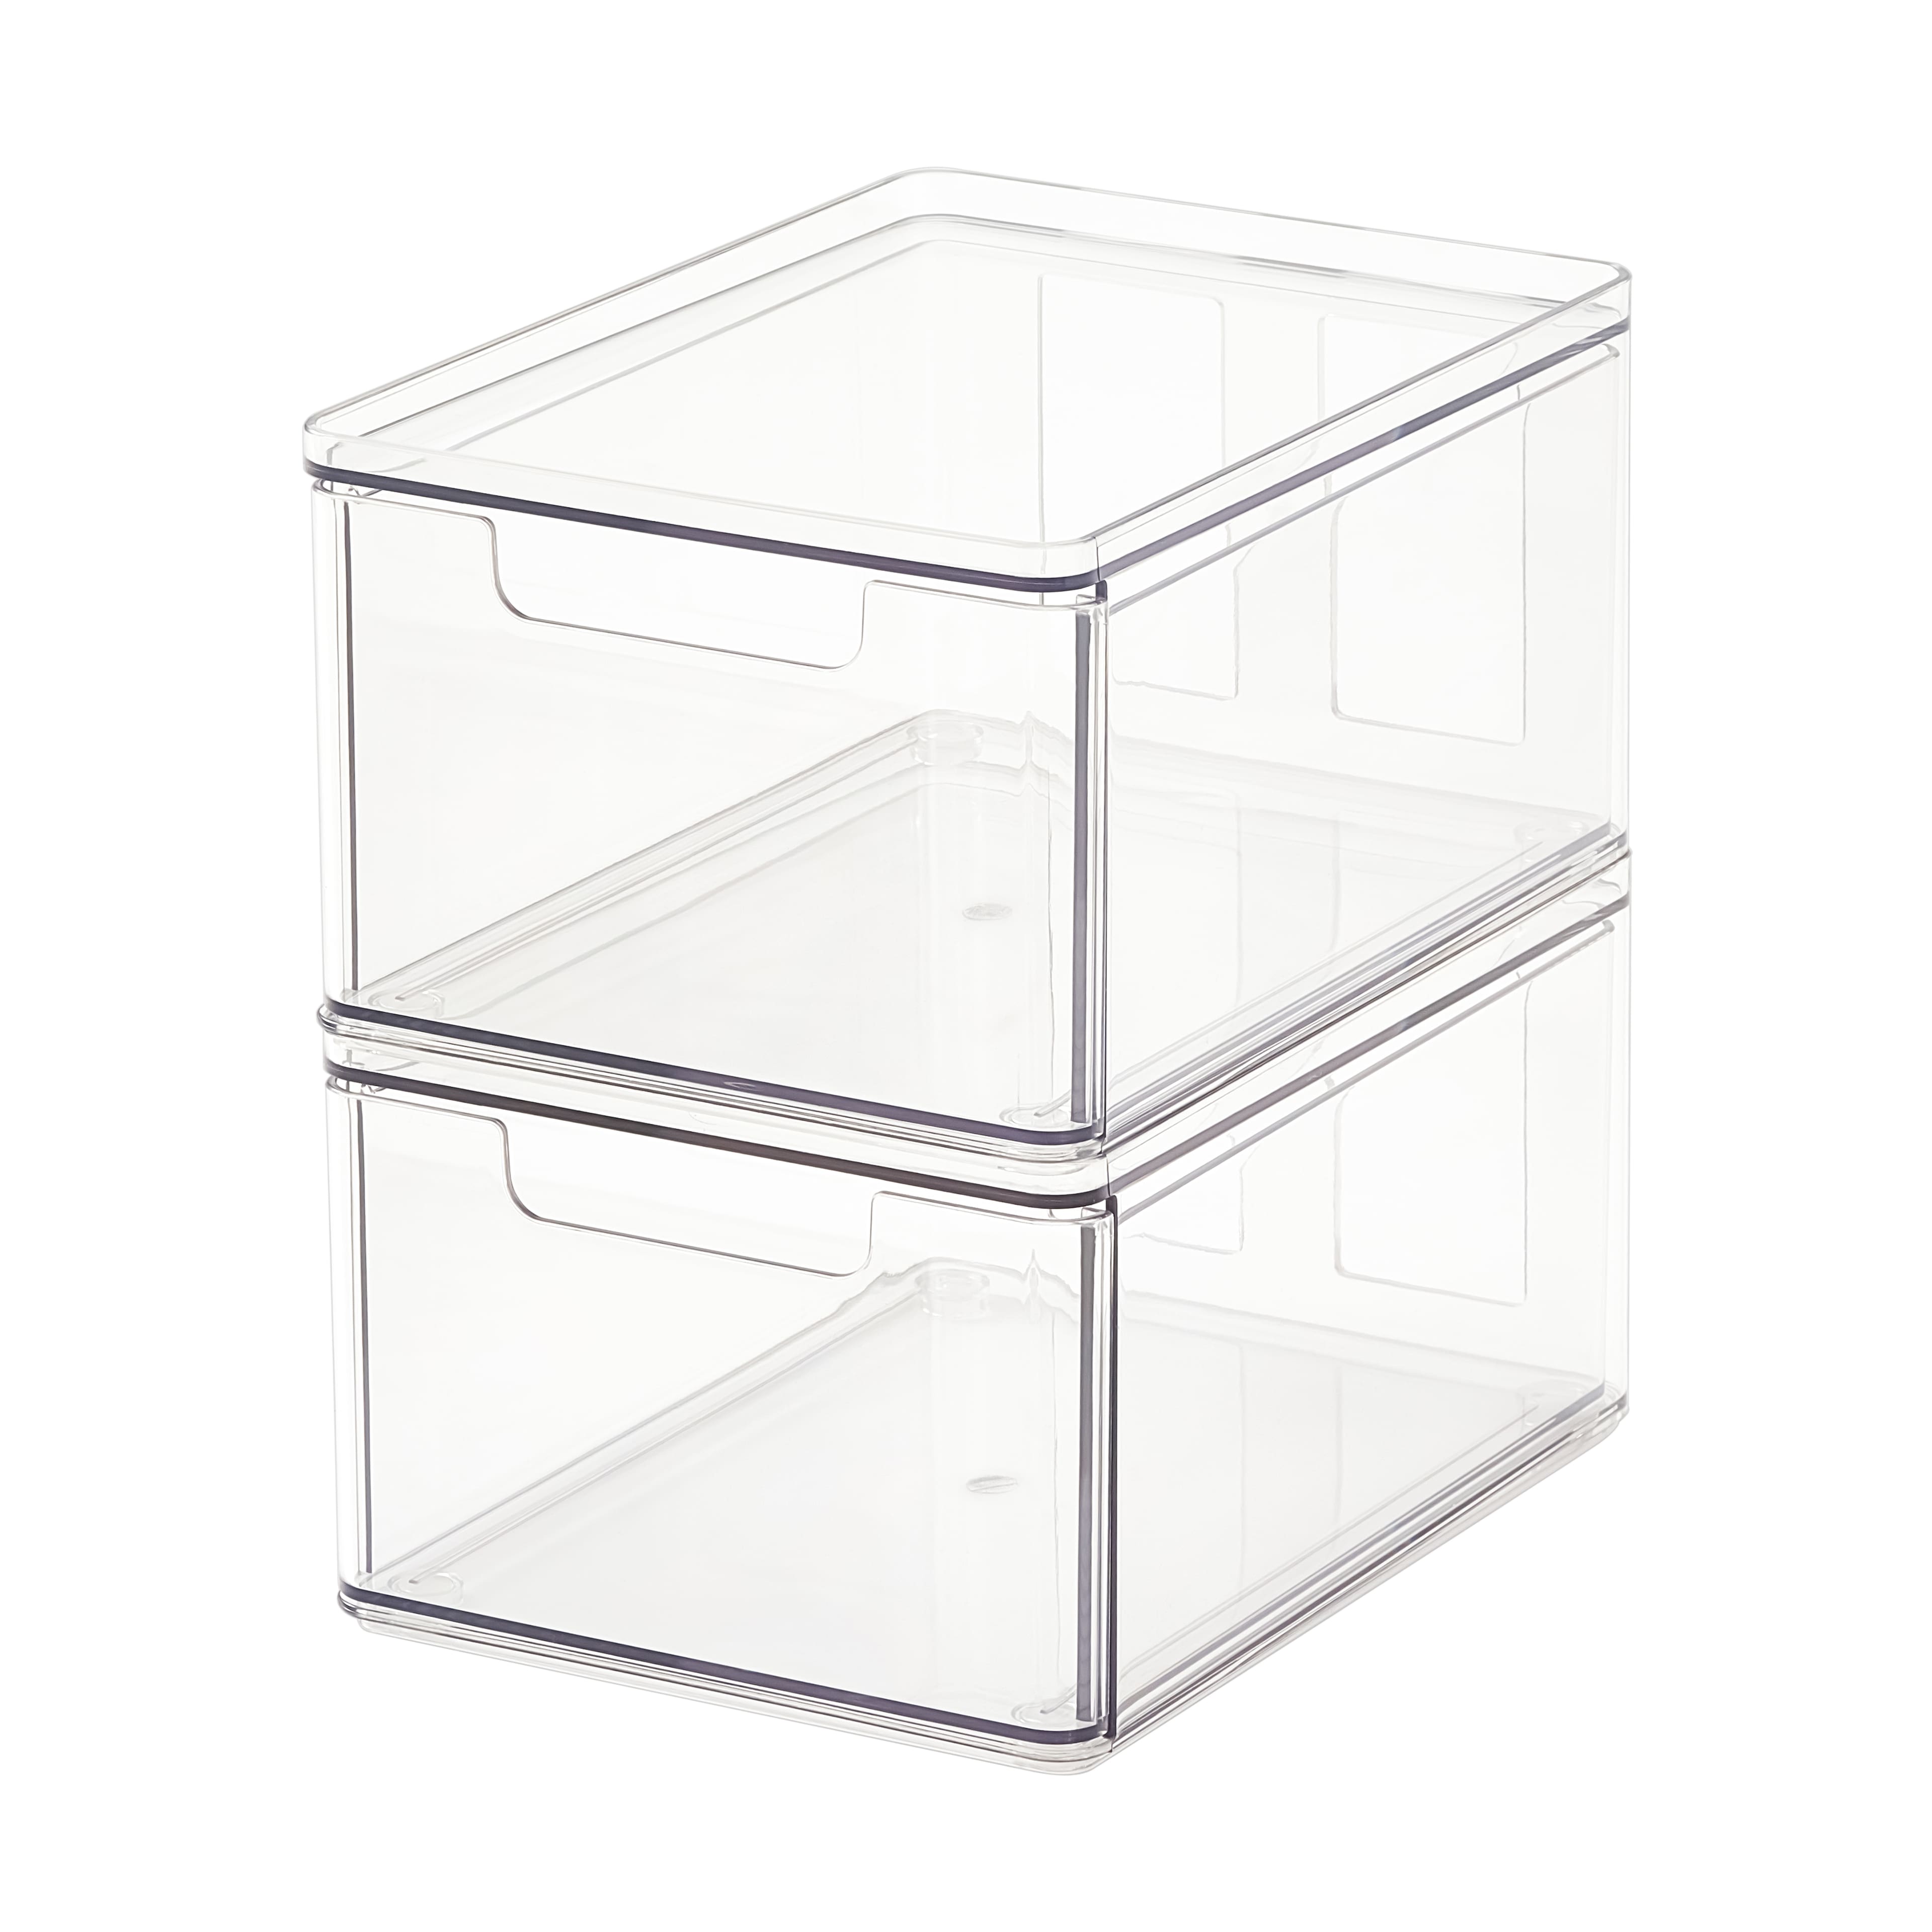 Performance Tool W5910 2-Drawer Interlocking Bin Design with Transparent  Drawers for Tool Storage - Stackable, Wall Mountable - 11.25-Inch W x